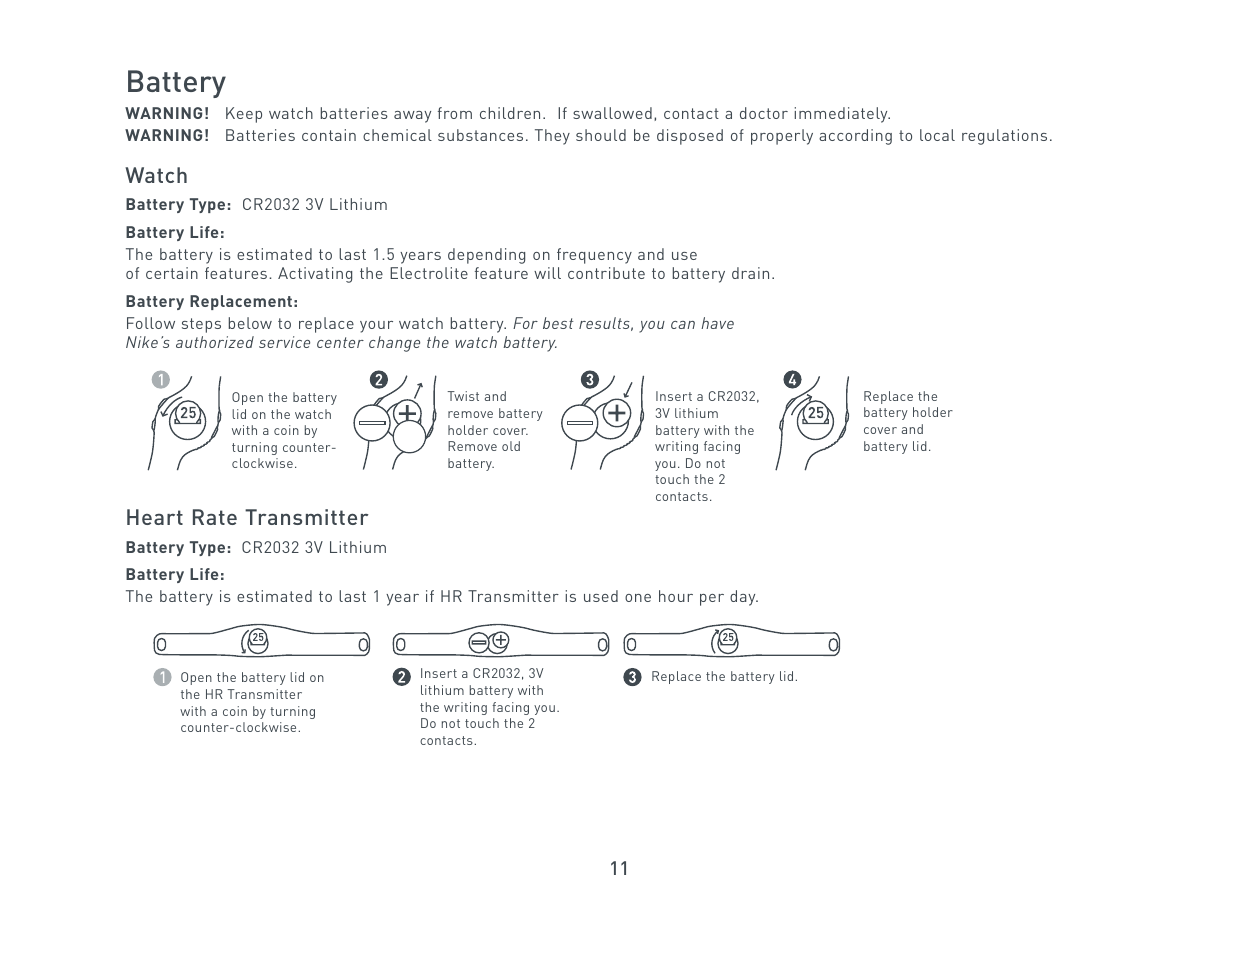 Battery, Watch, Heart rate transmitter | Nike Triax C5 User Manual | Page  11 / 12